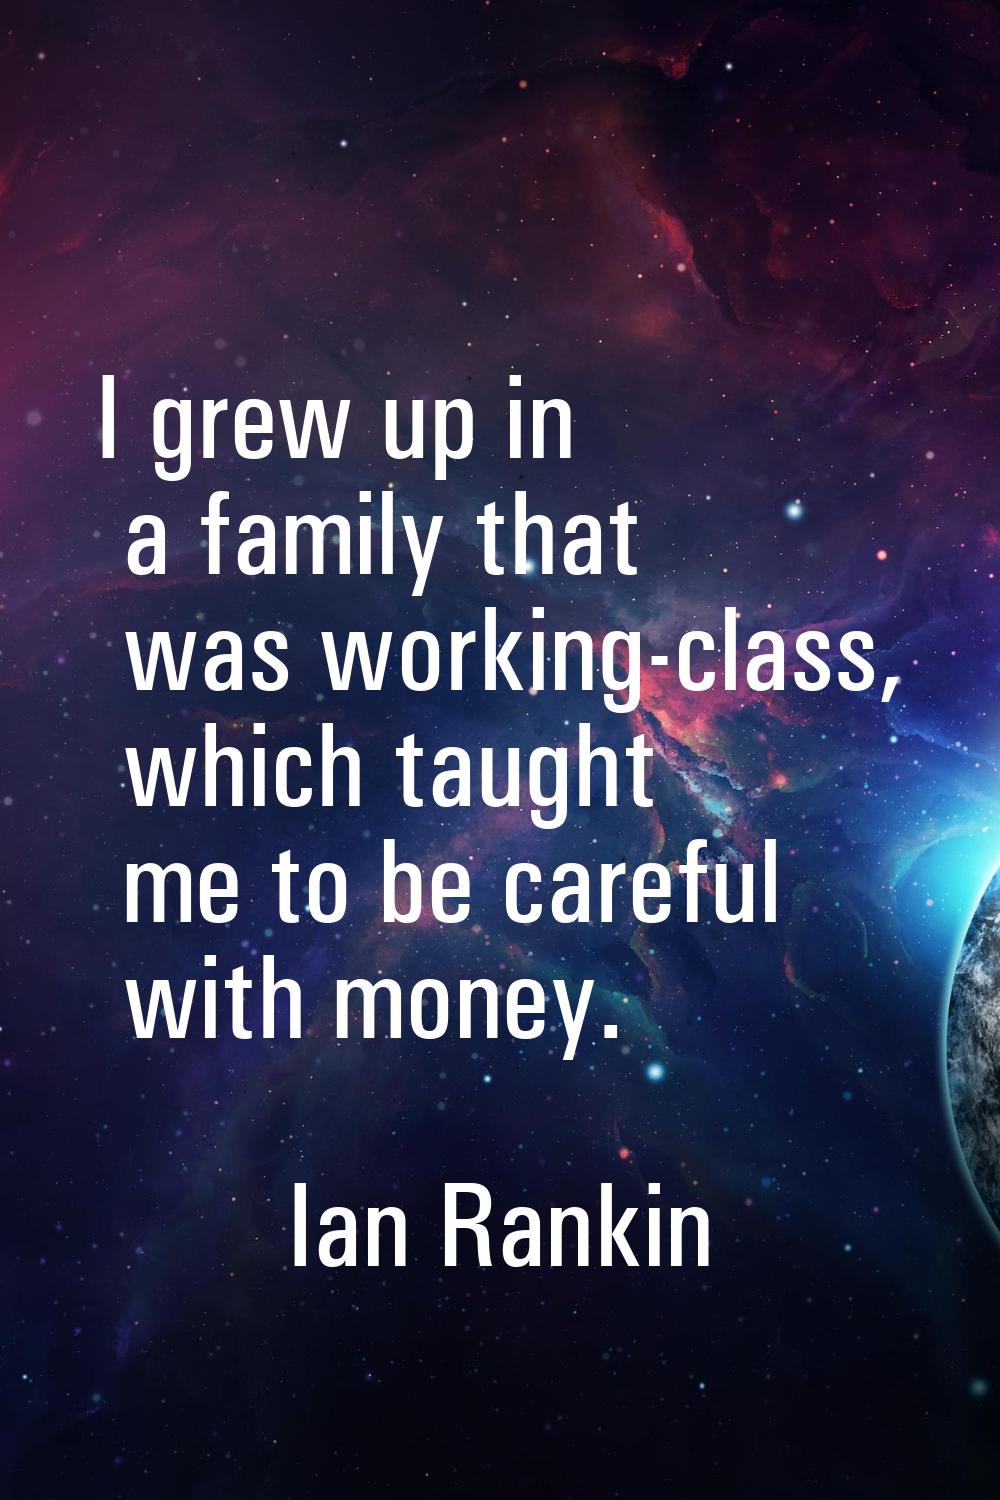 I grew up in a family that was working-class, which taught me to be careful with money.